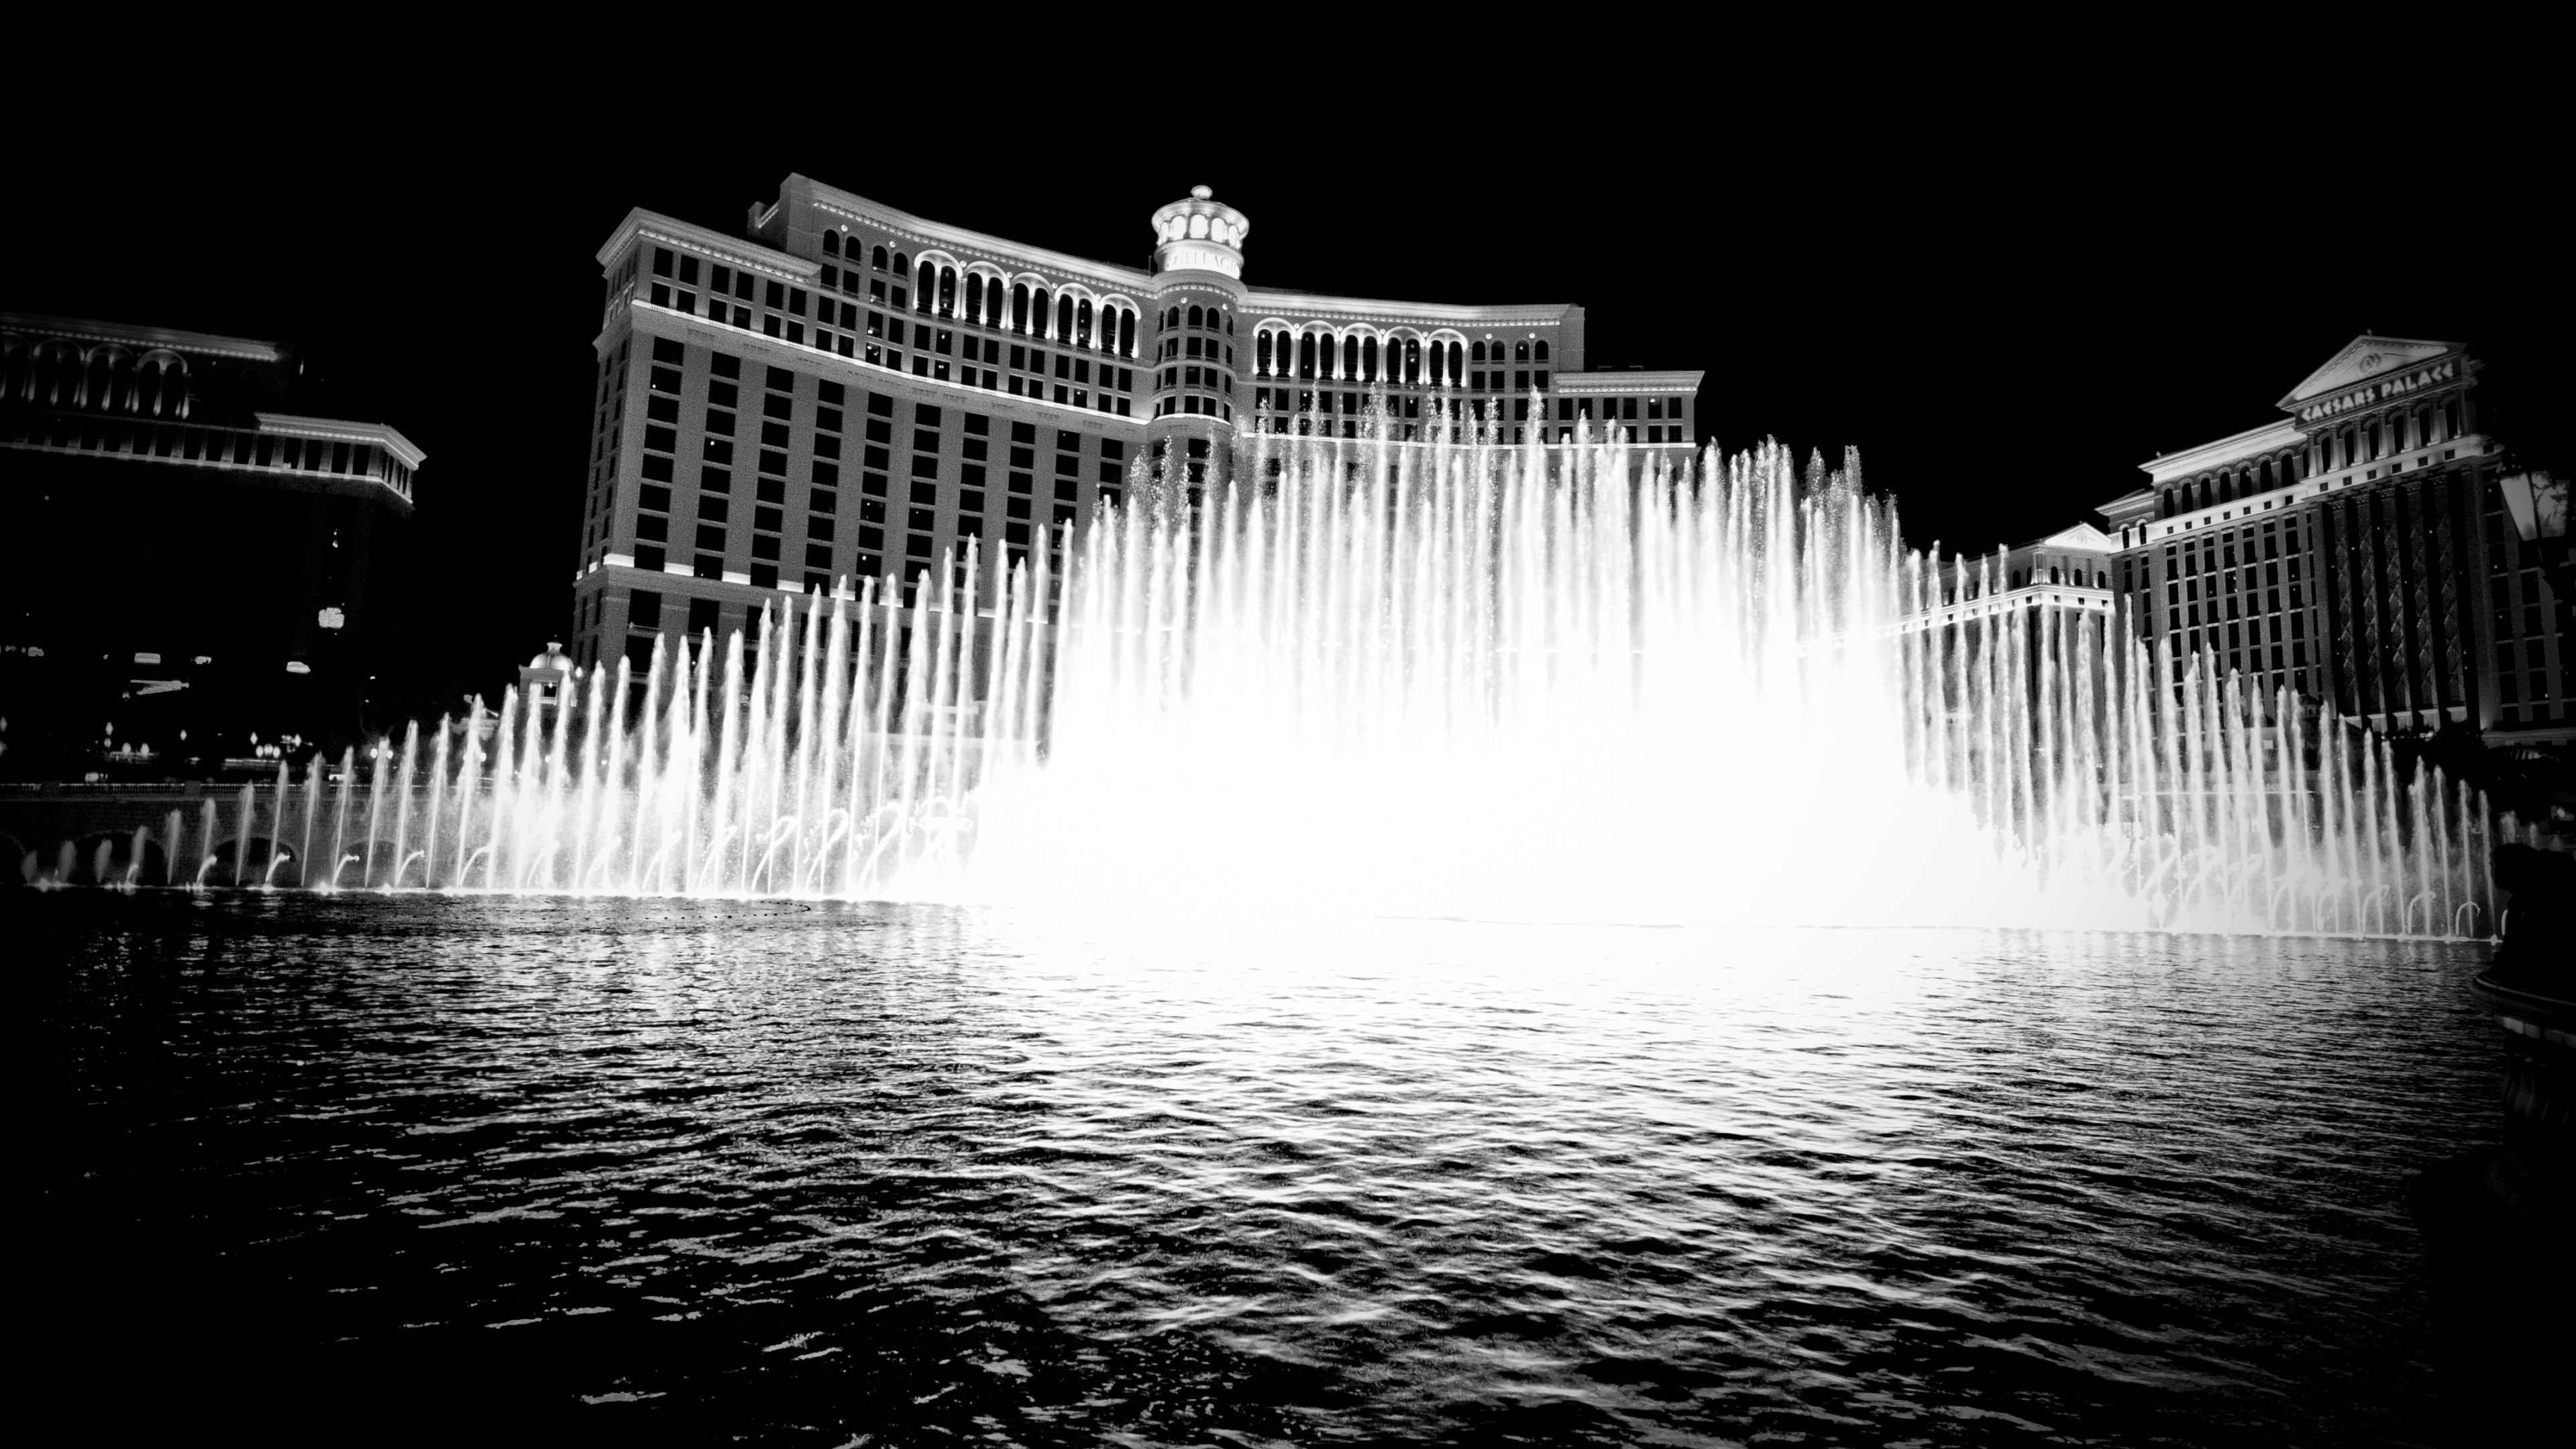 Fountains in front of the Bellagio in Las Vegas.